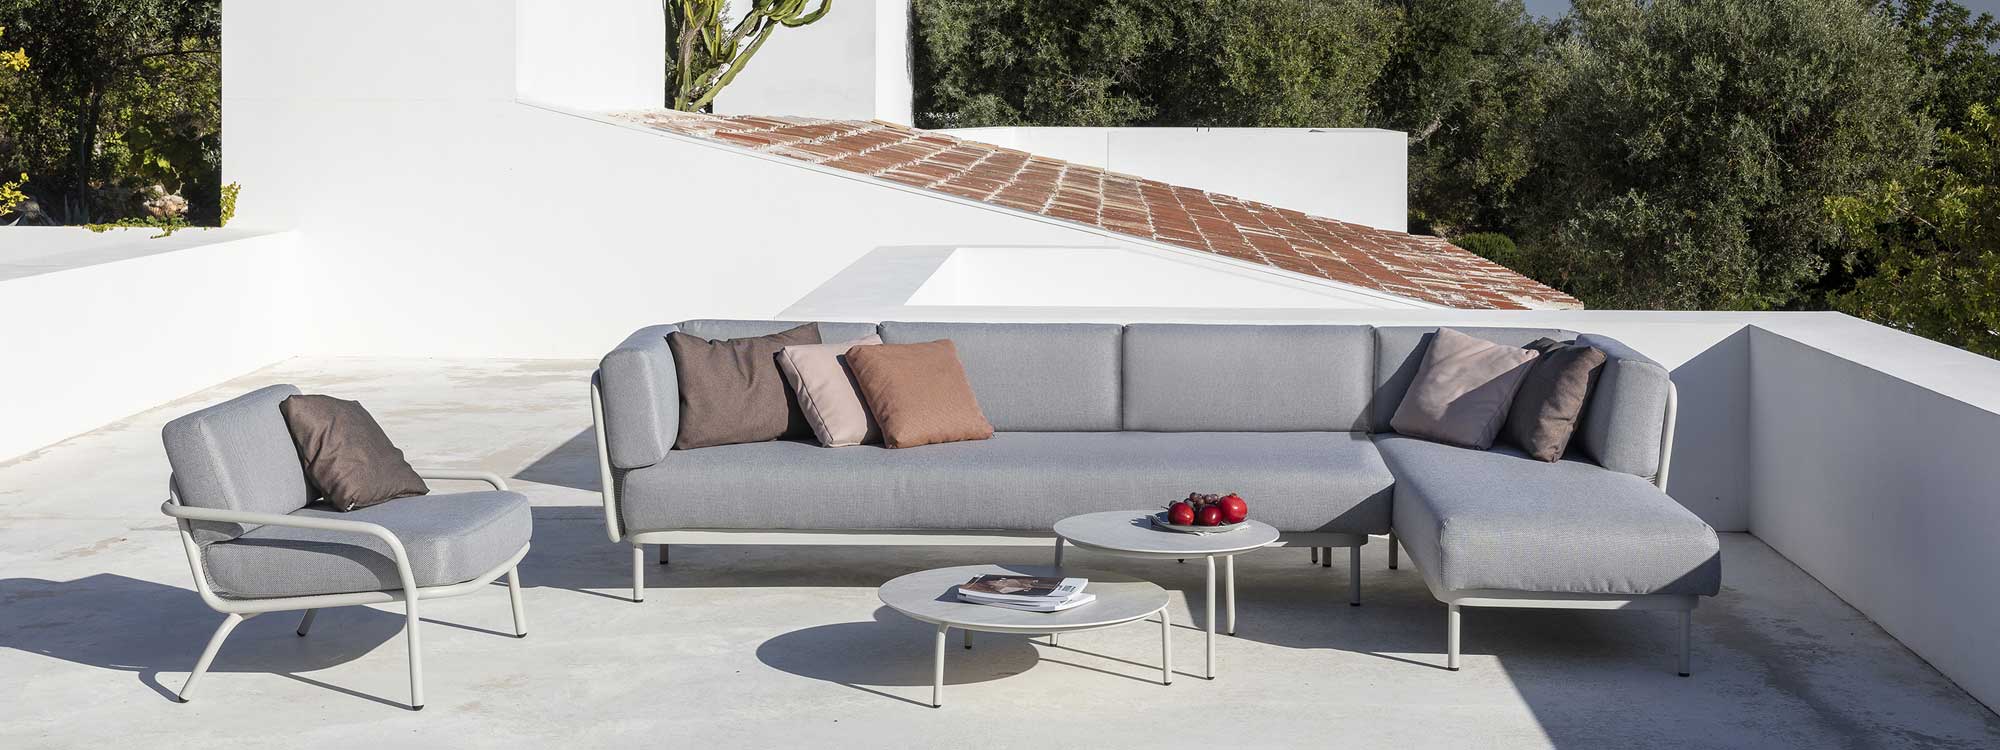 Image of white Baza garden sofa and Starling longer chair & low tables on sizzling hot terrace